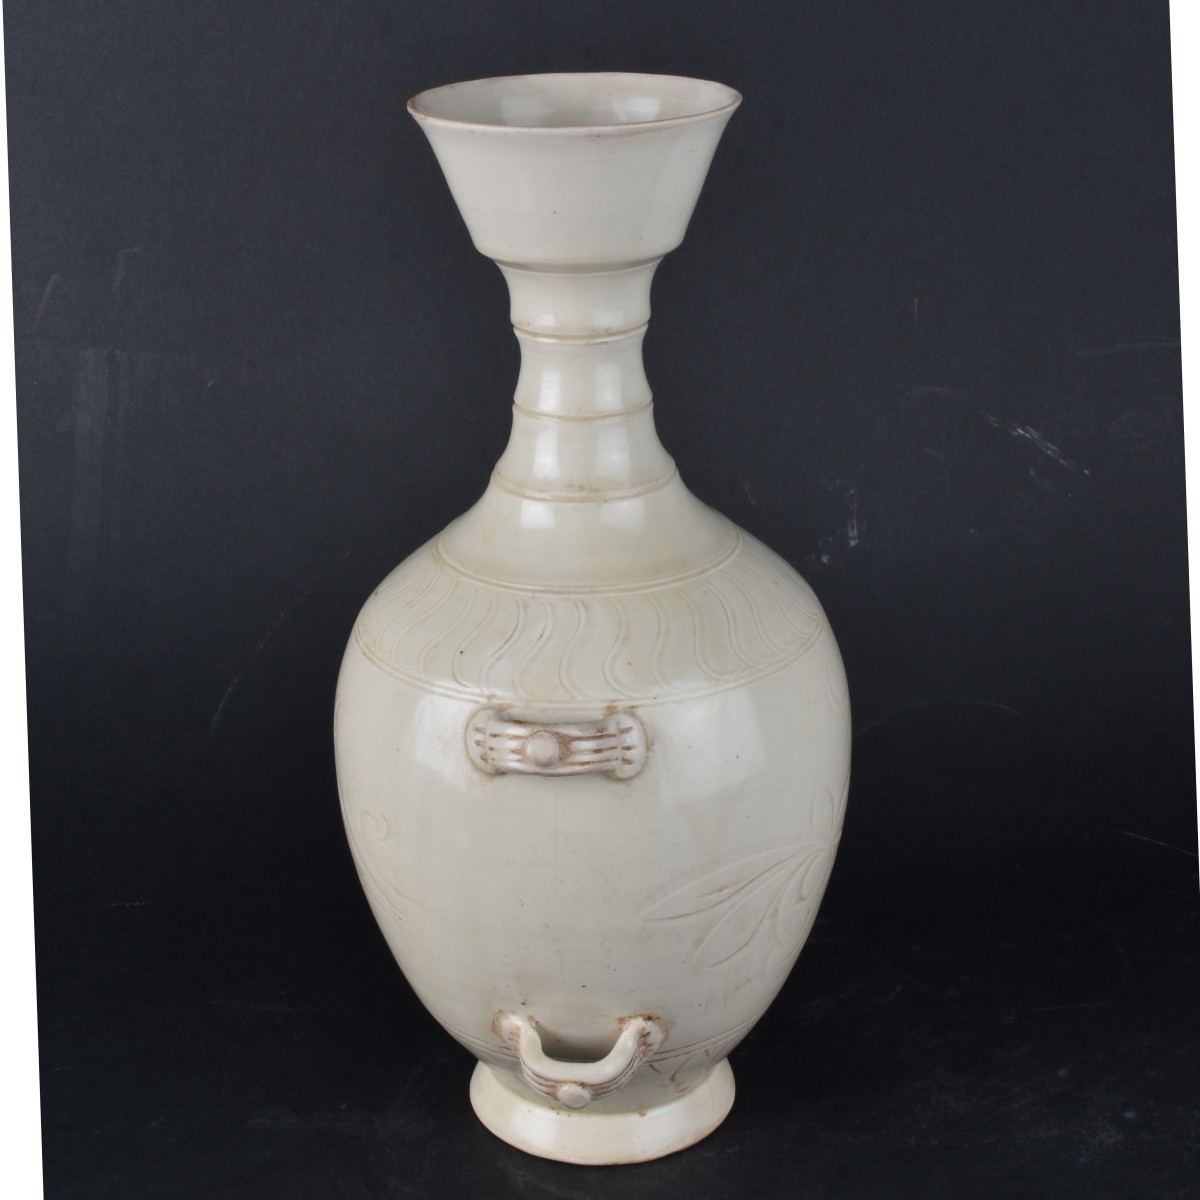 Chinese Ding Ware Vase